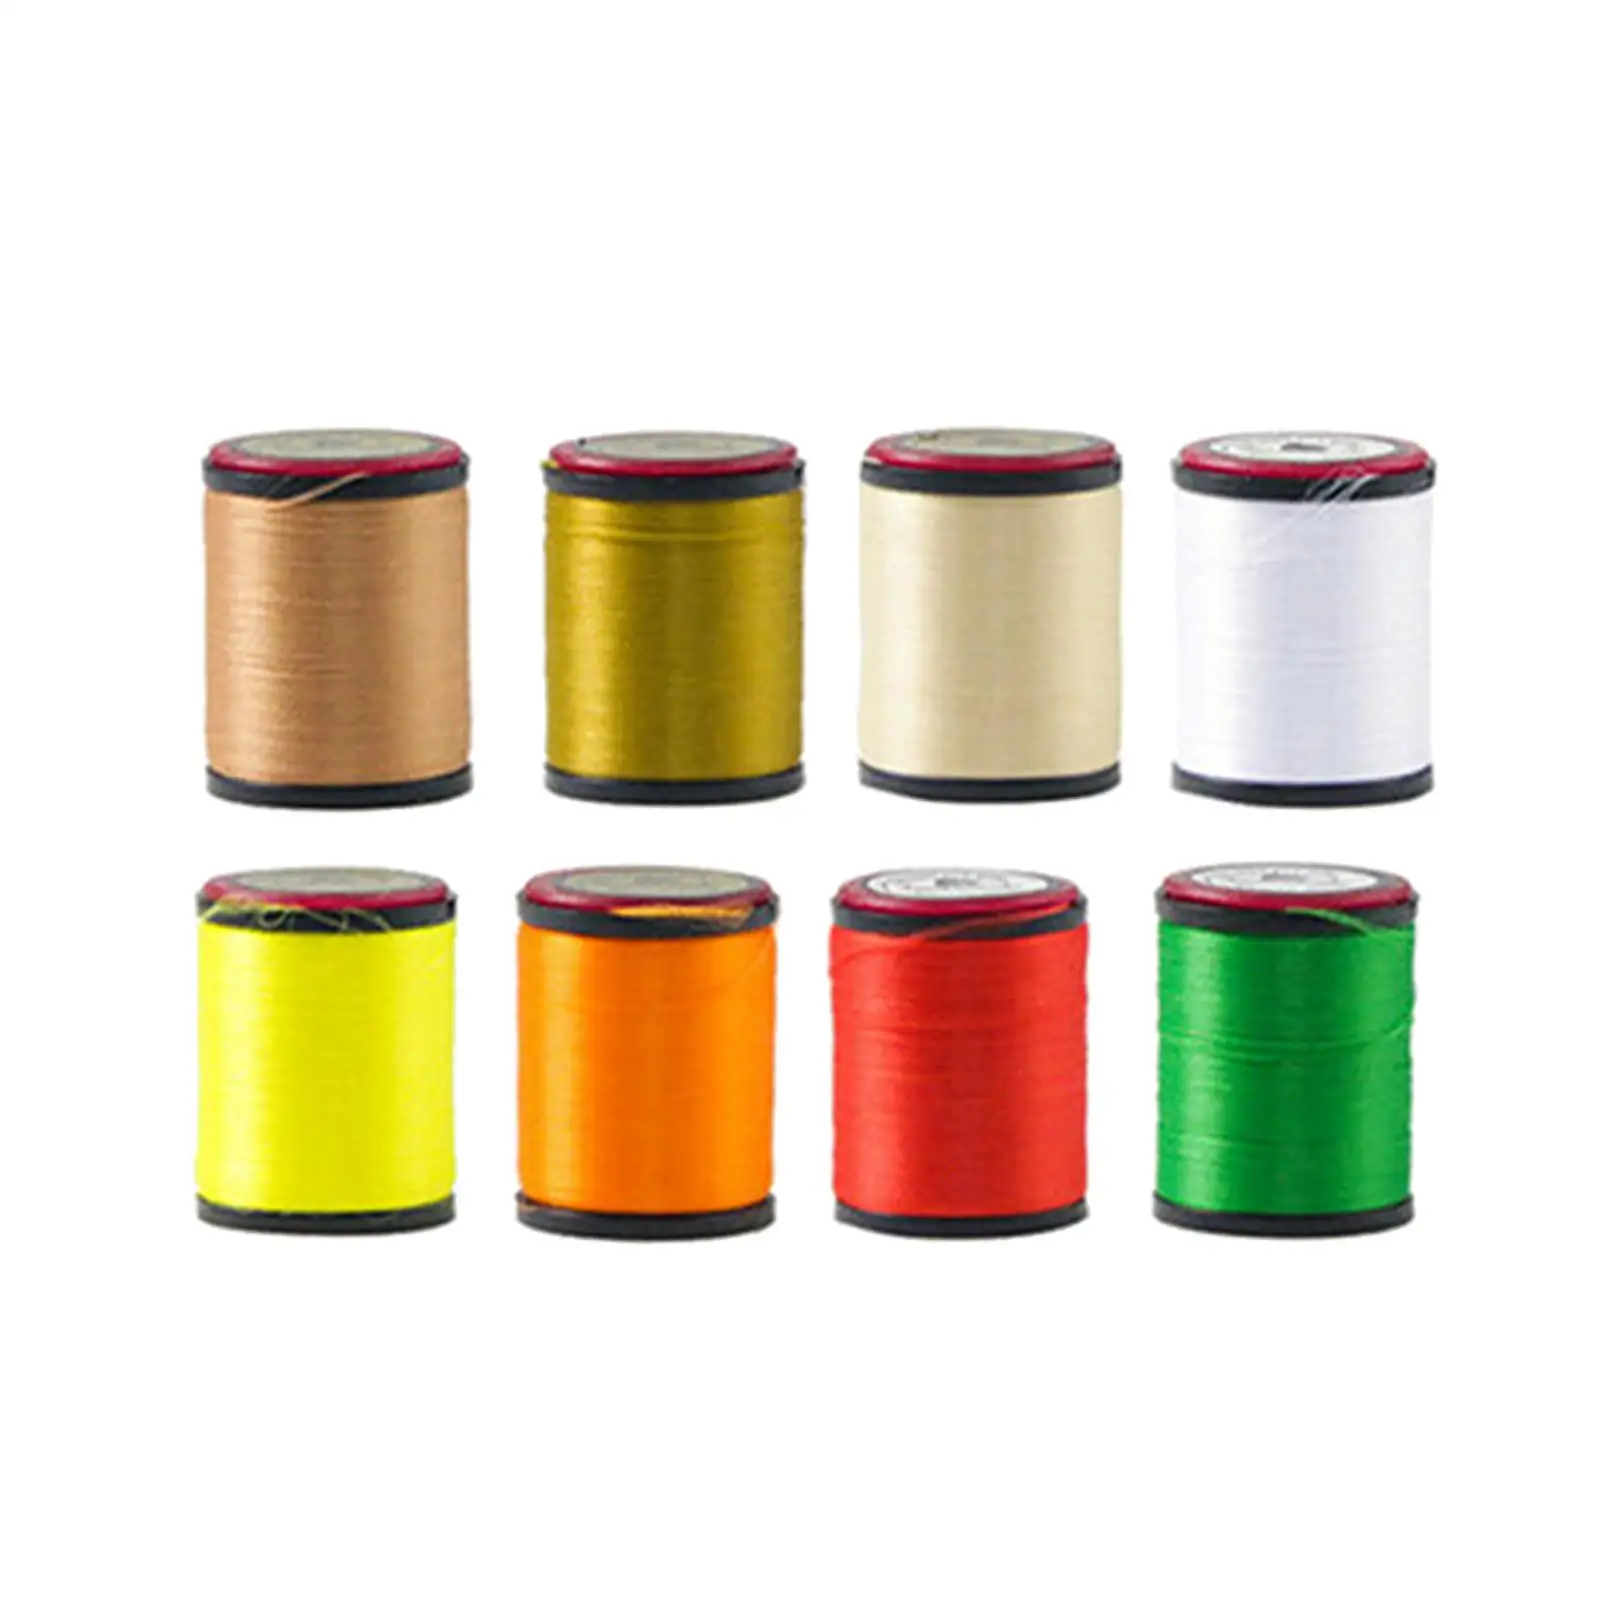 Fly Tying Thread Fly Tying Materials Supplies Thread Fly Fishing Fly Tieing